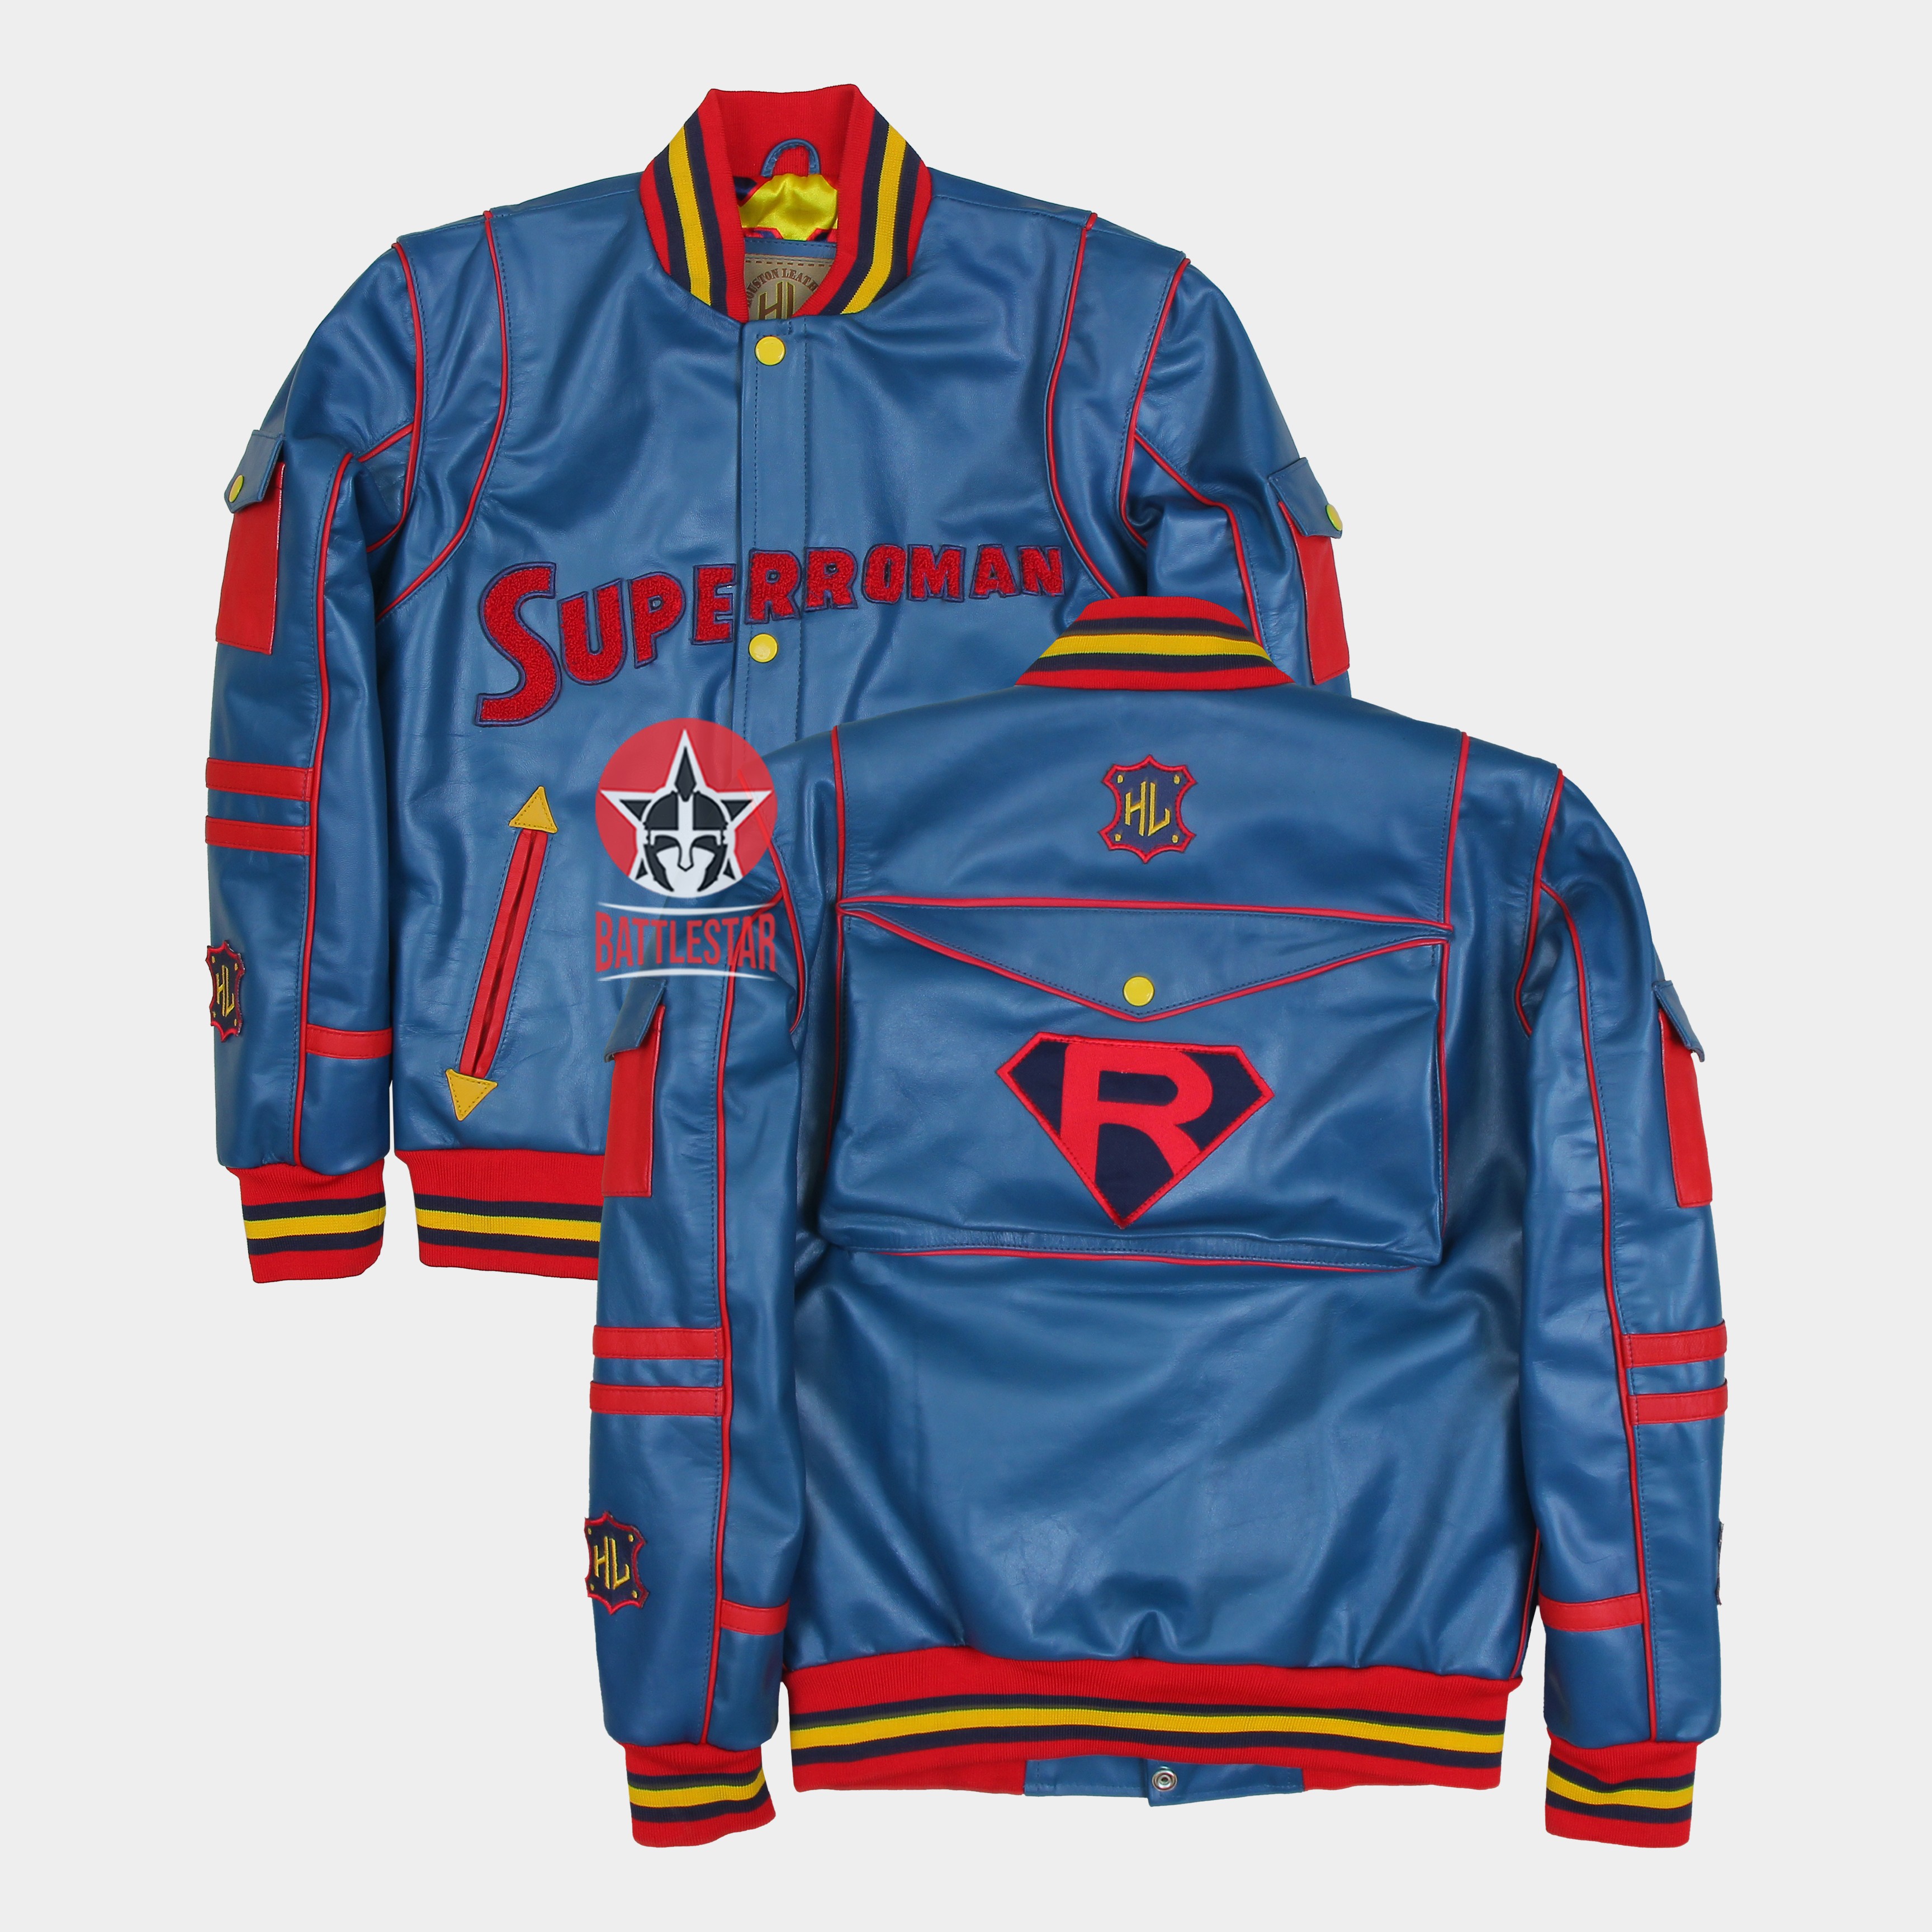 A Personalized Full Leather Embroidered Superman Jacket